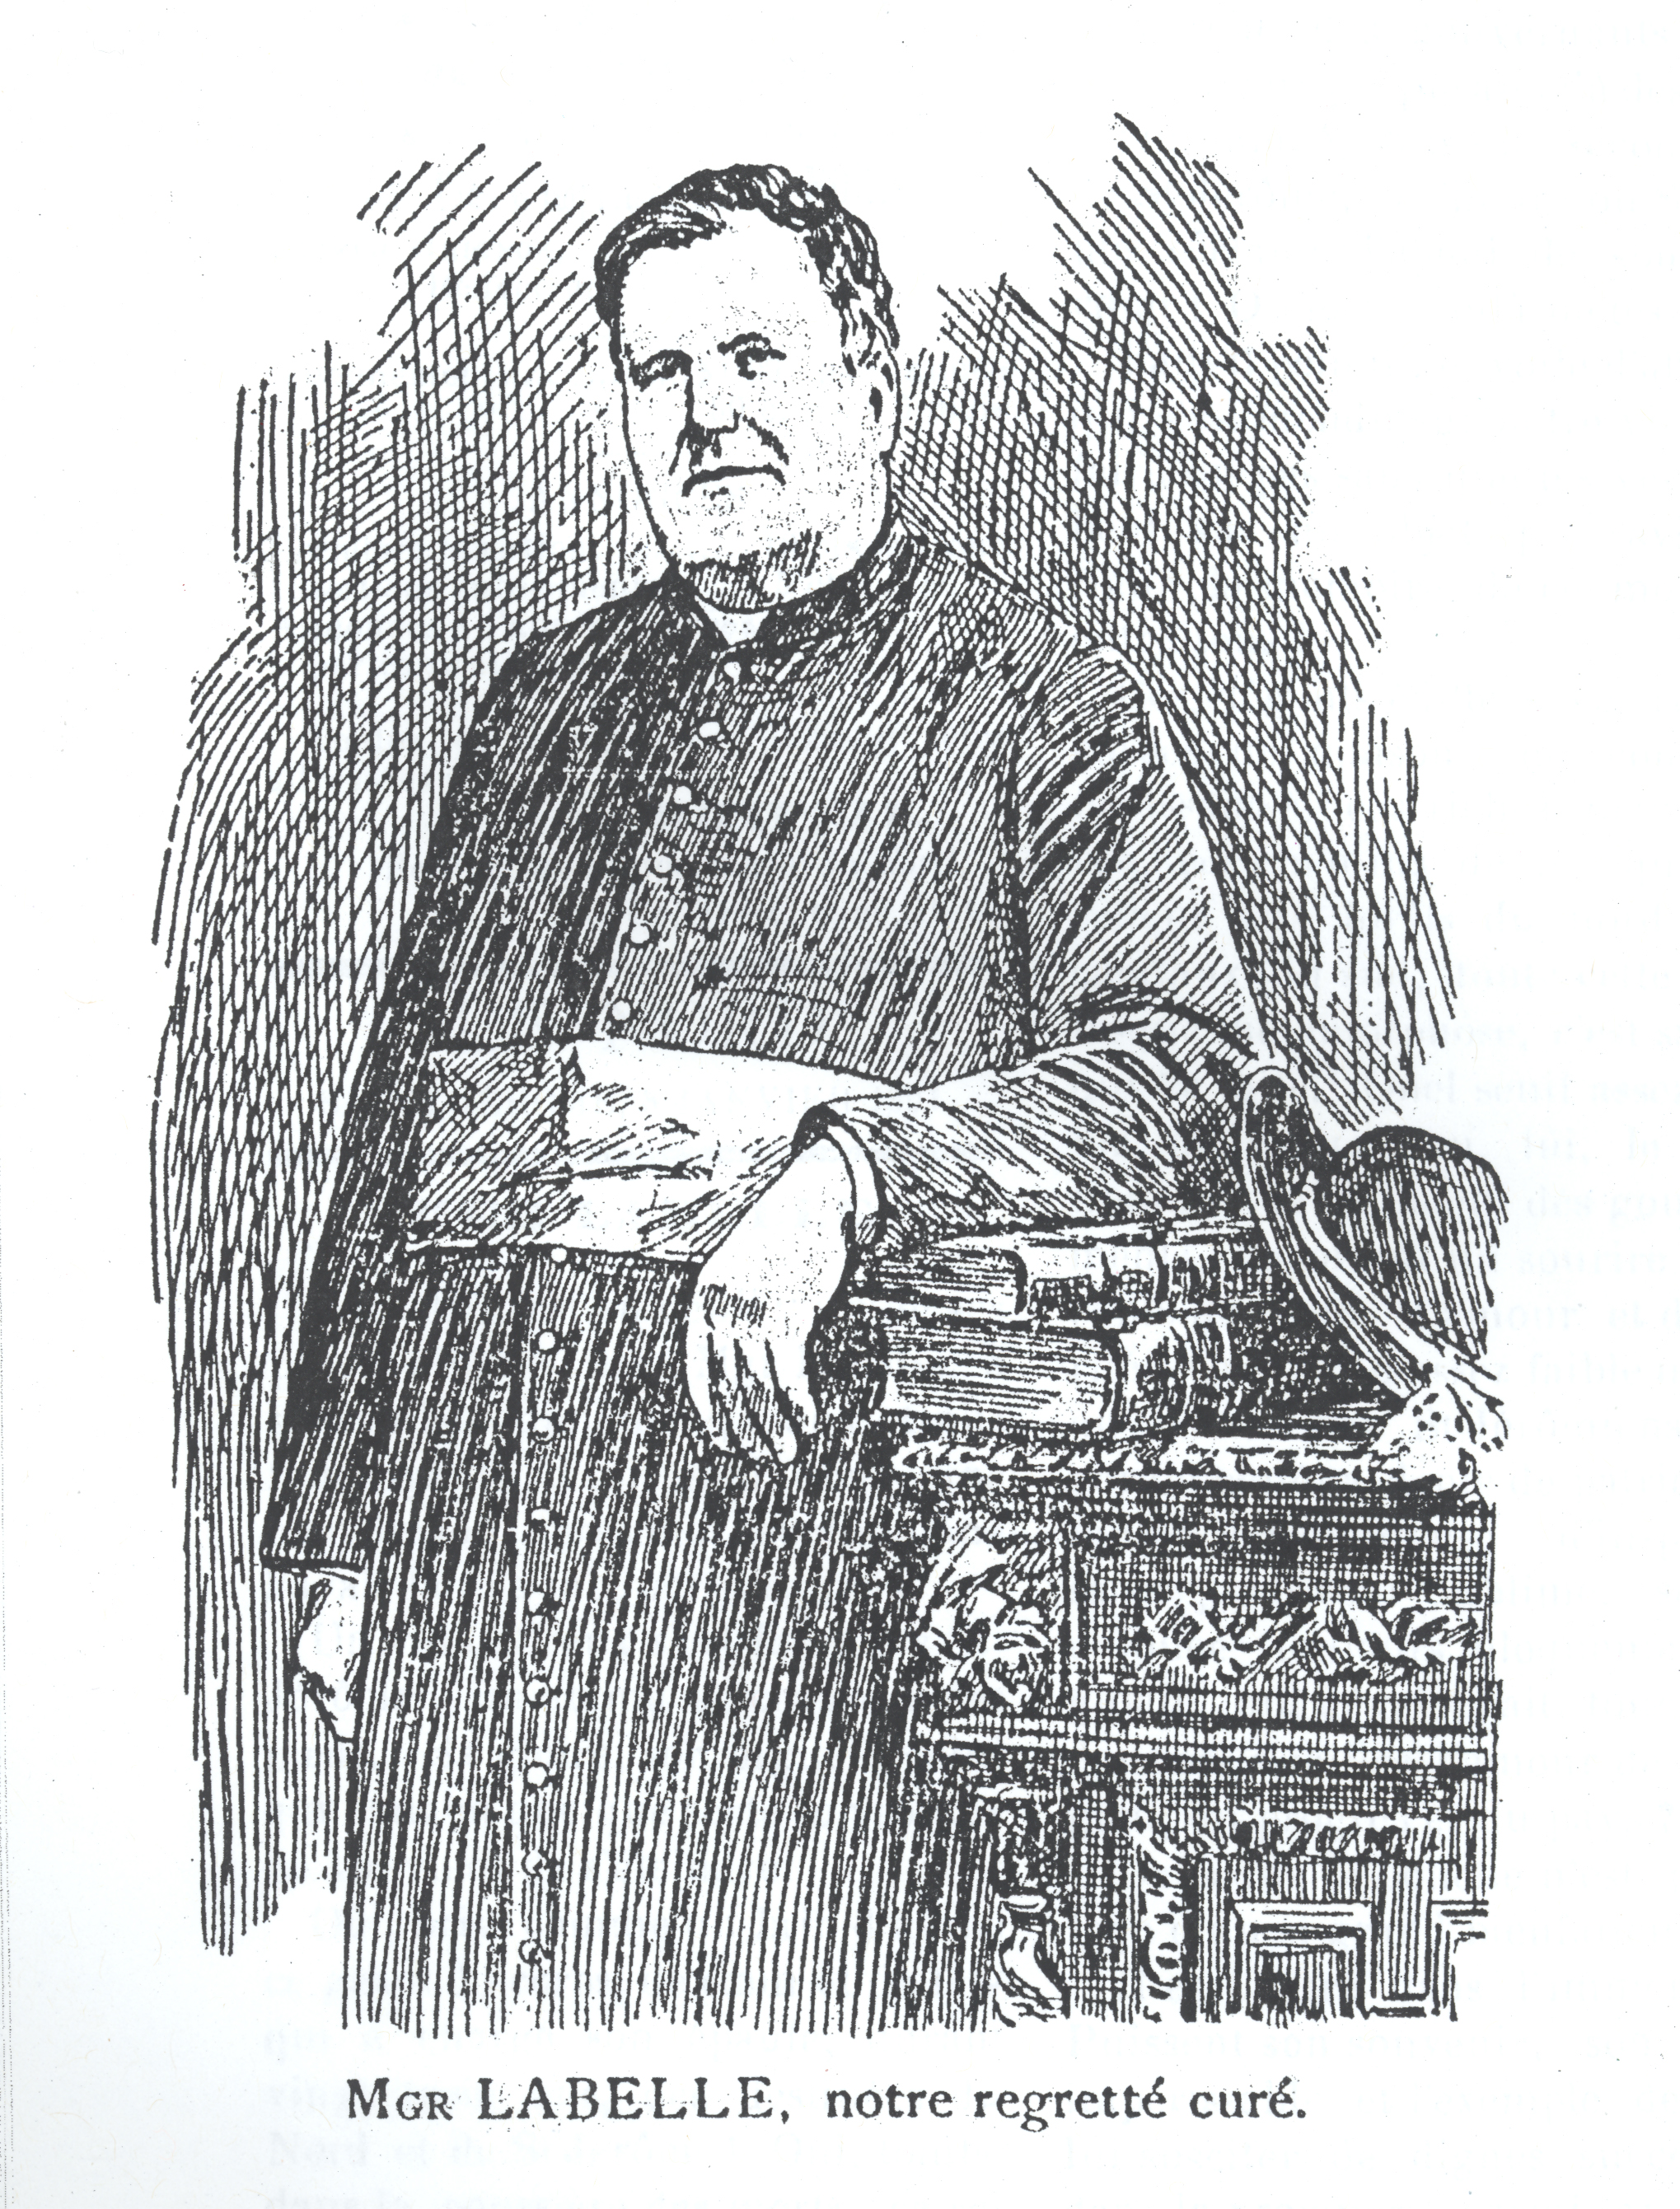 Engraving in black ink depicting a priest in his fifties, with short, curly hair. He wears a buttoned cassock, and a wide sash, symbolizing position in the Catholic hierarchy. He is standing, with his arm resting on two books that sit on a table to his left.